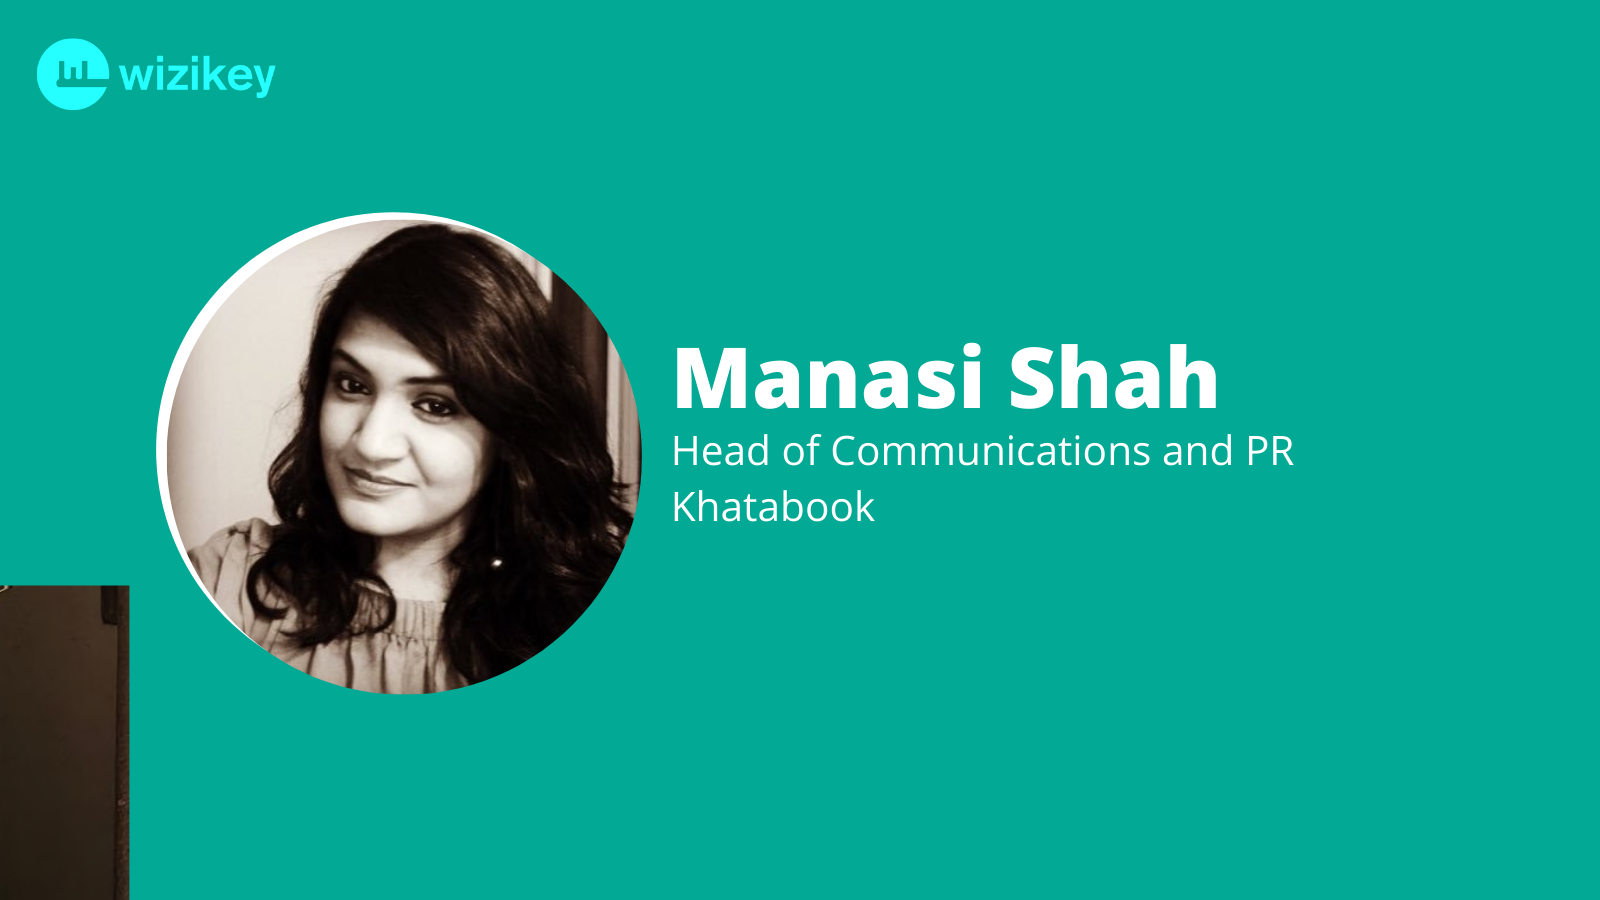 Data can help you assess the impact: Manasi from Khatabook